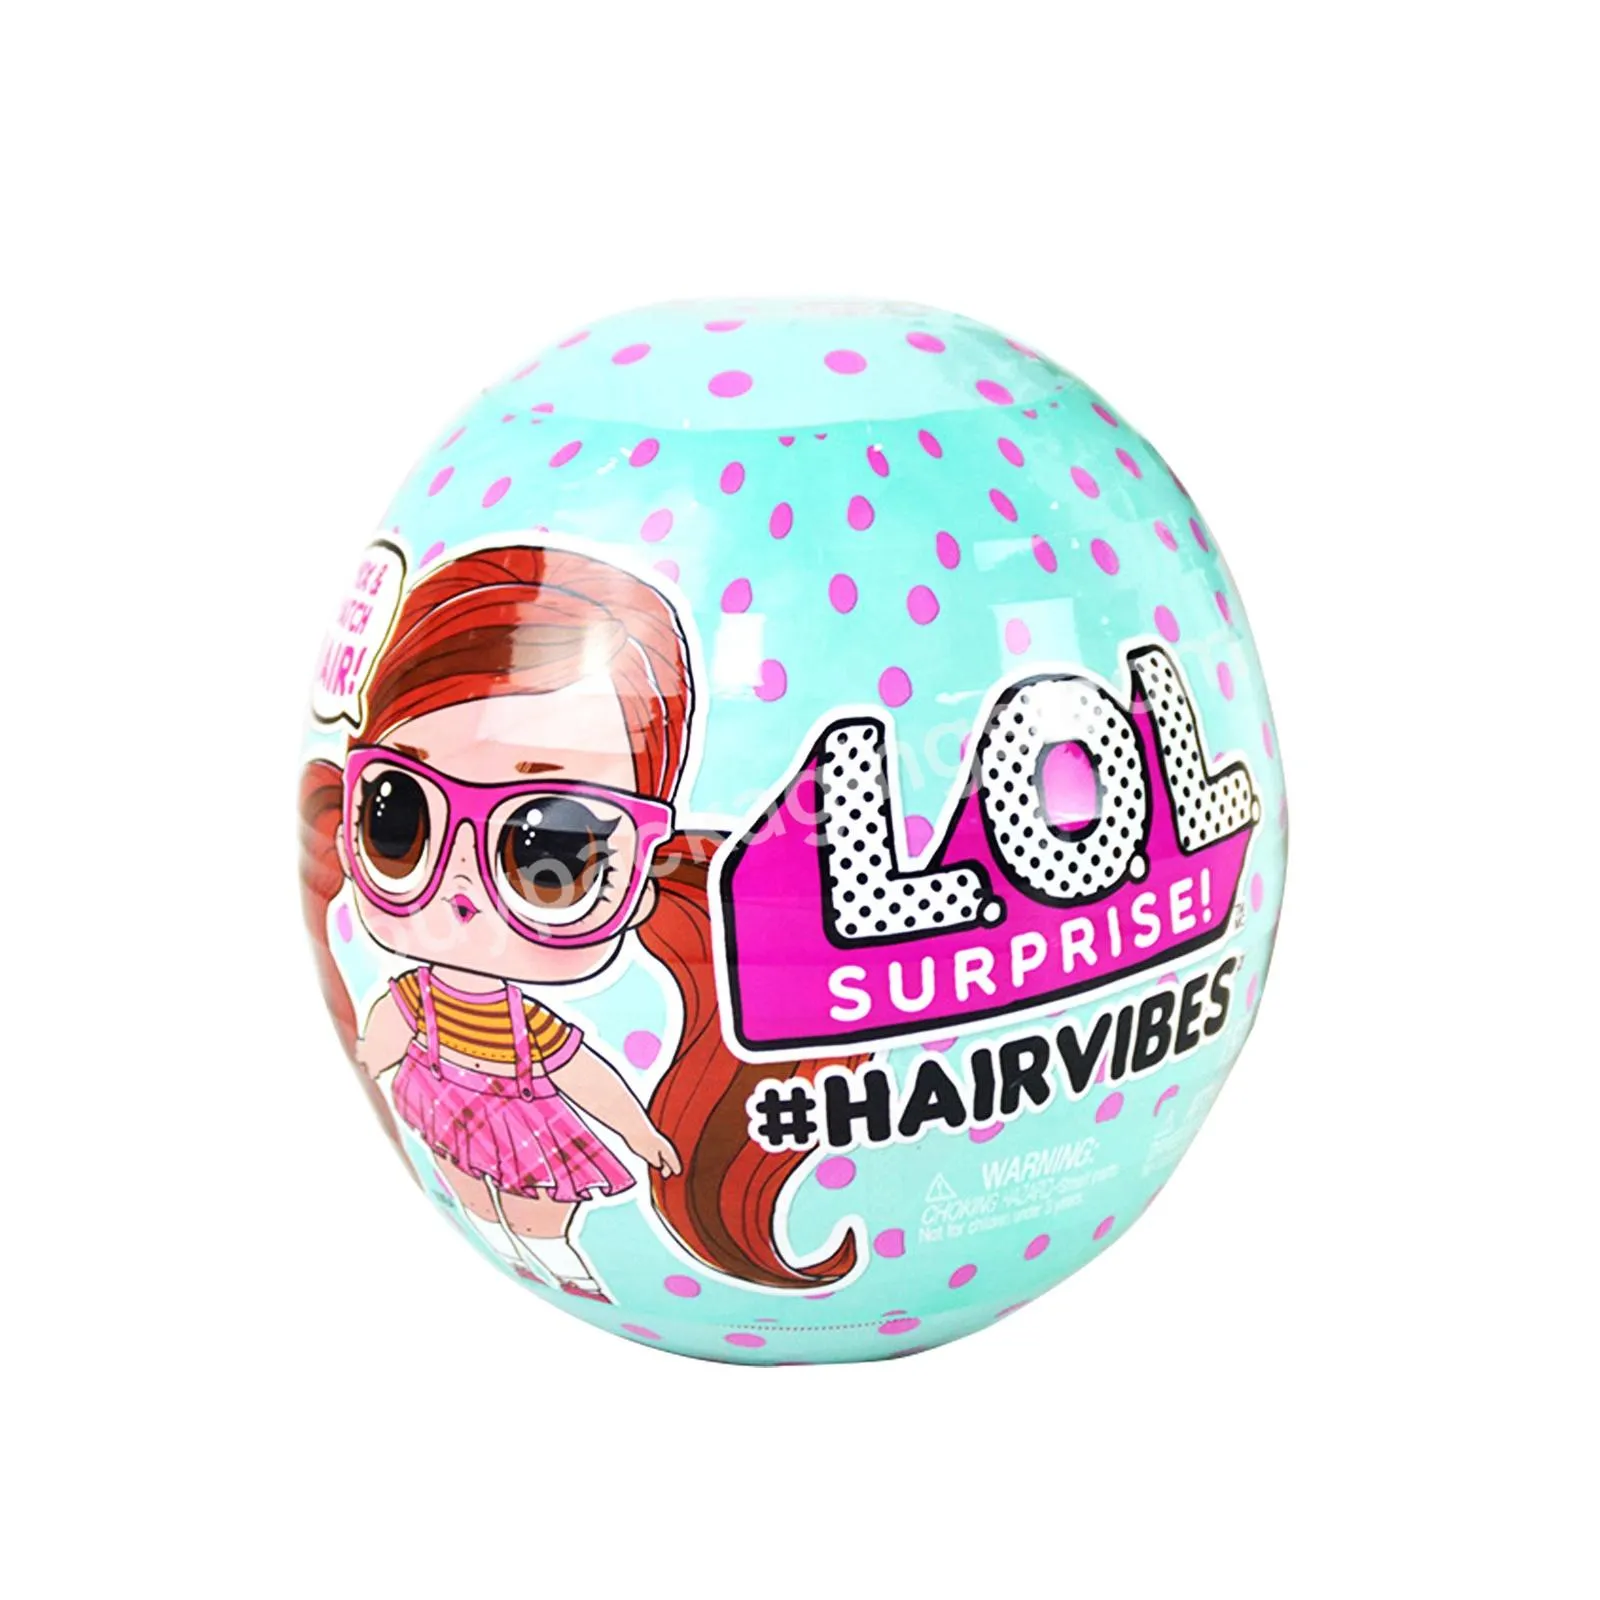 Custom Logo Printed Colorful Pvc Shrink Label /film For Toy Ball Crystal Maginc Ball - Buy Pvc Shrink Sleeves Film Decoration Easter Egg Wraps,Shrink Wrap For Children Toy Ball,Crystal Maginc Ball Packaging Wrap Label.